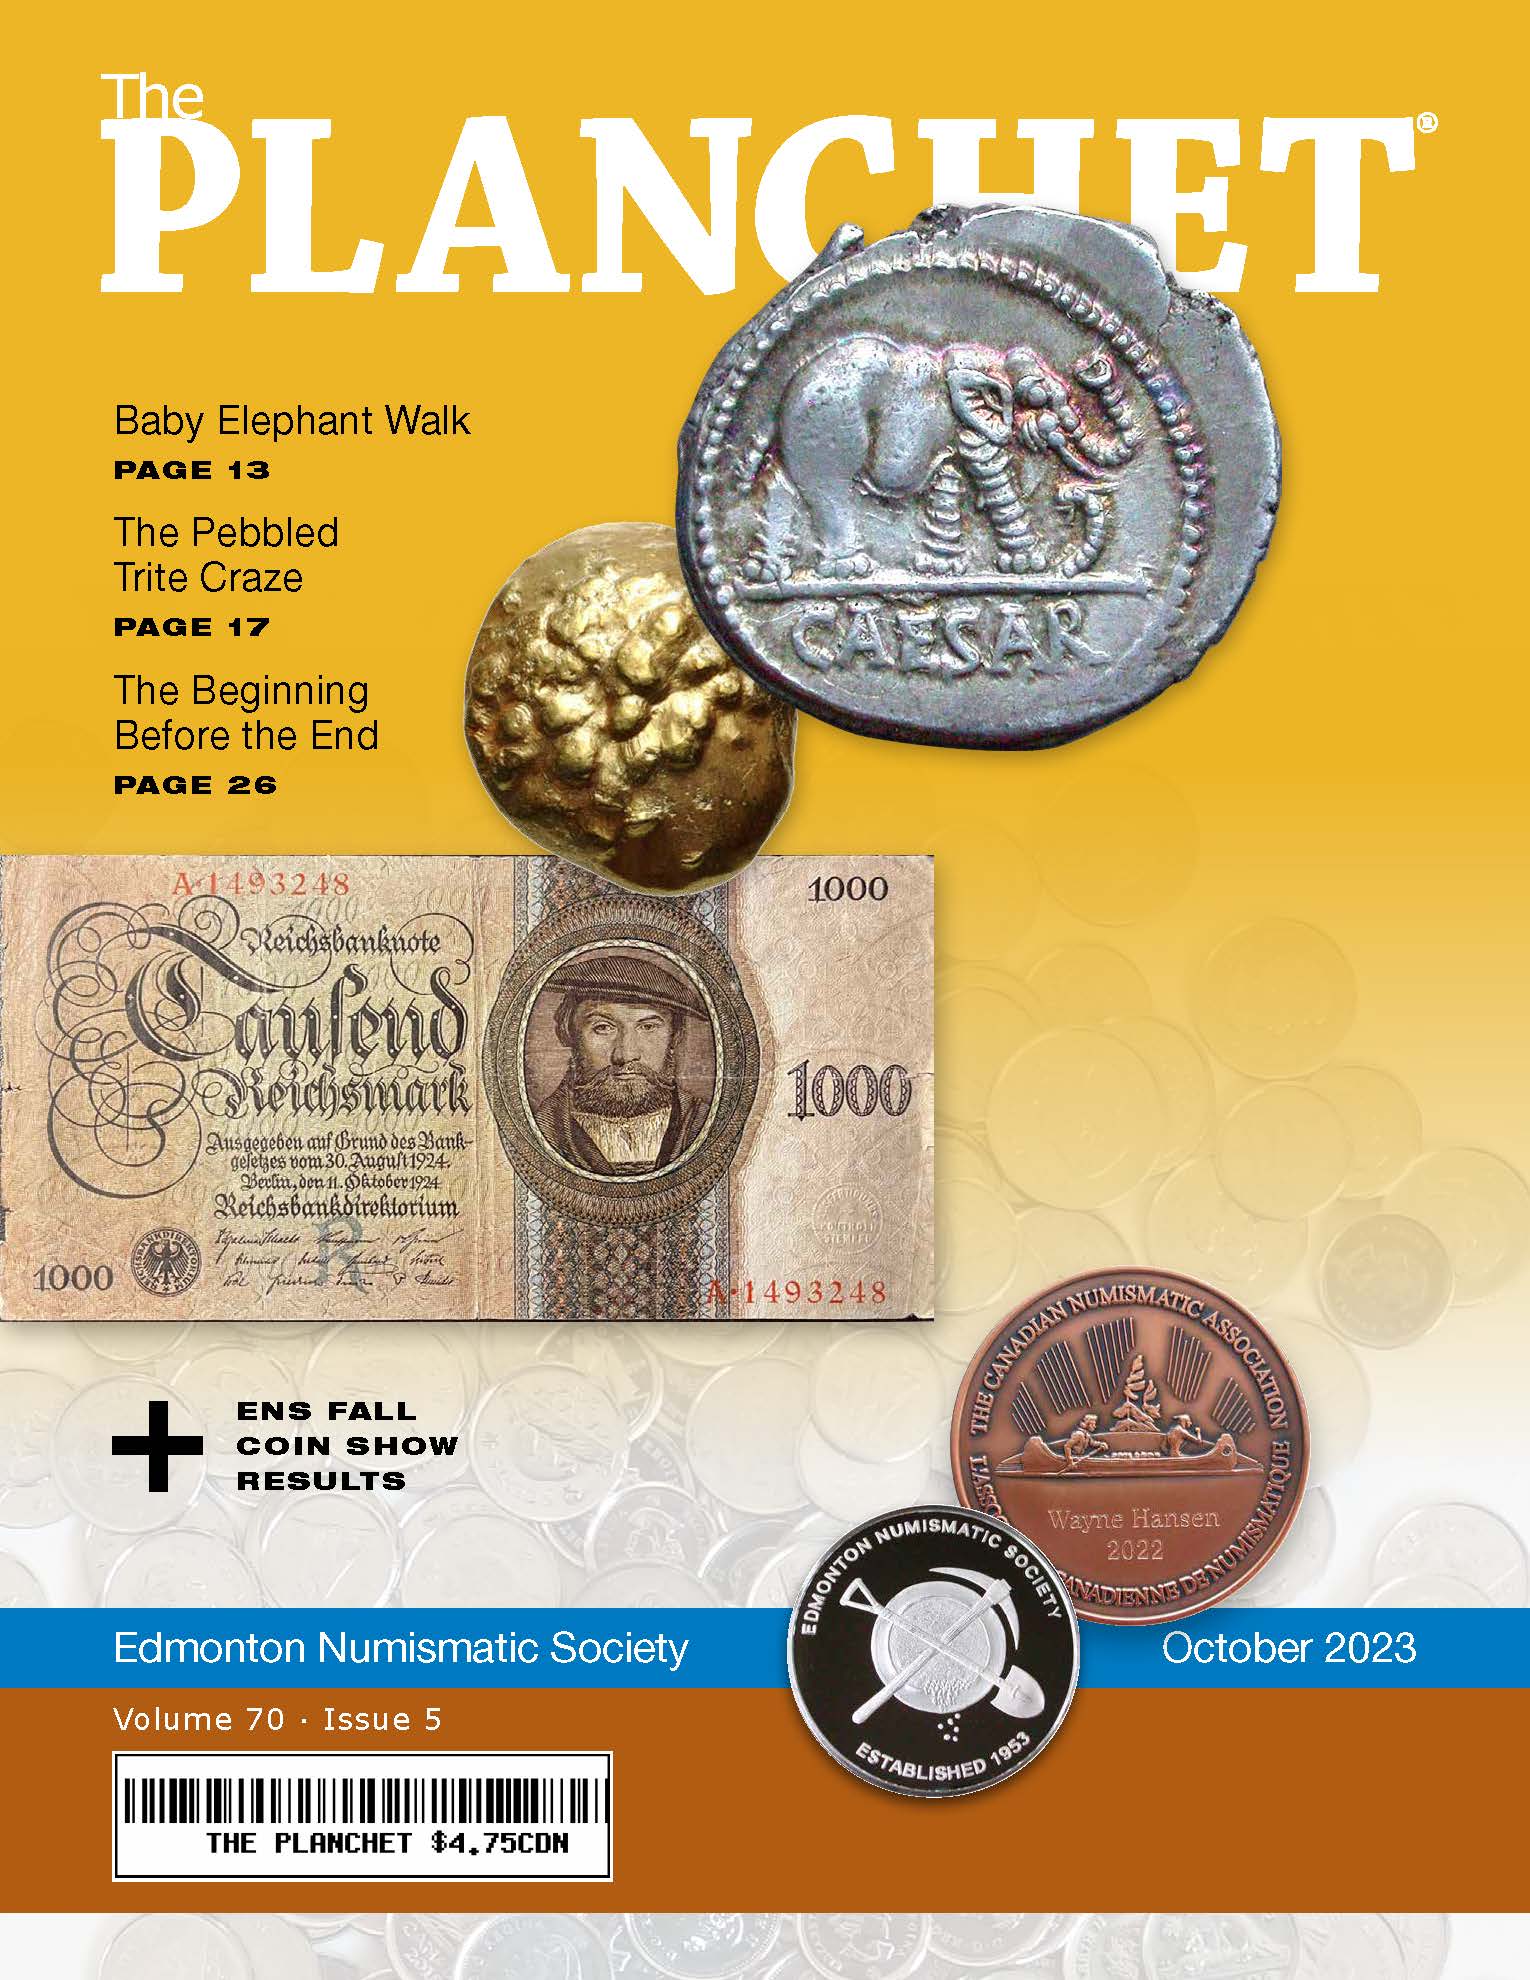 Protected: The Planchet Numismatic Magazine: October 2023